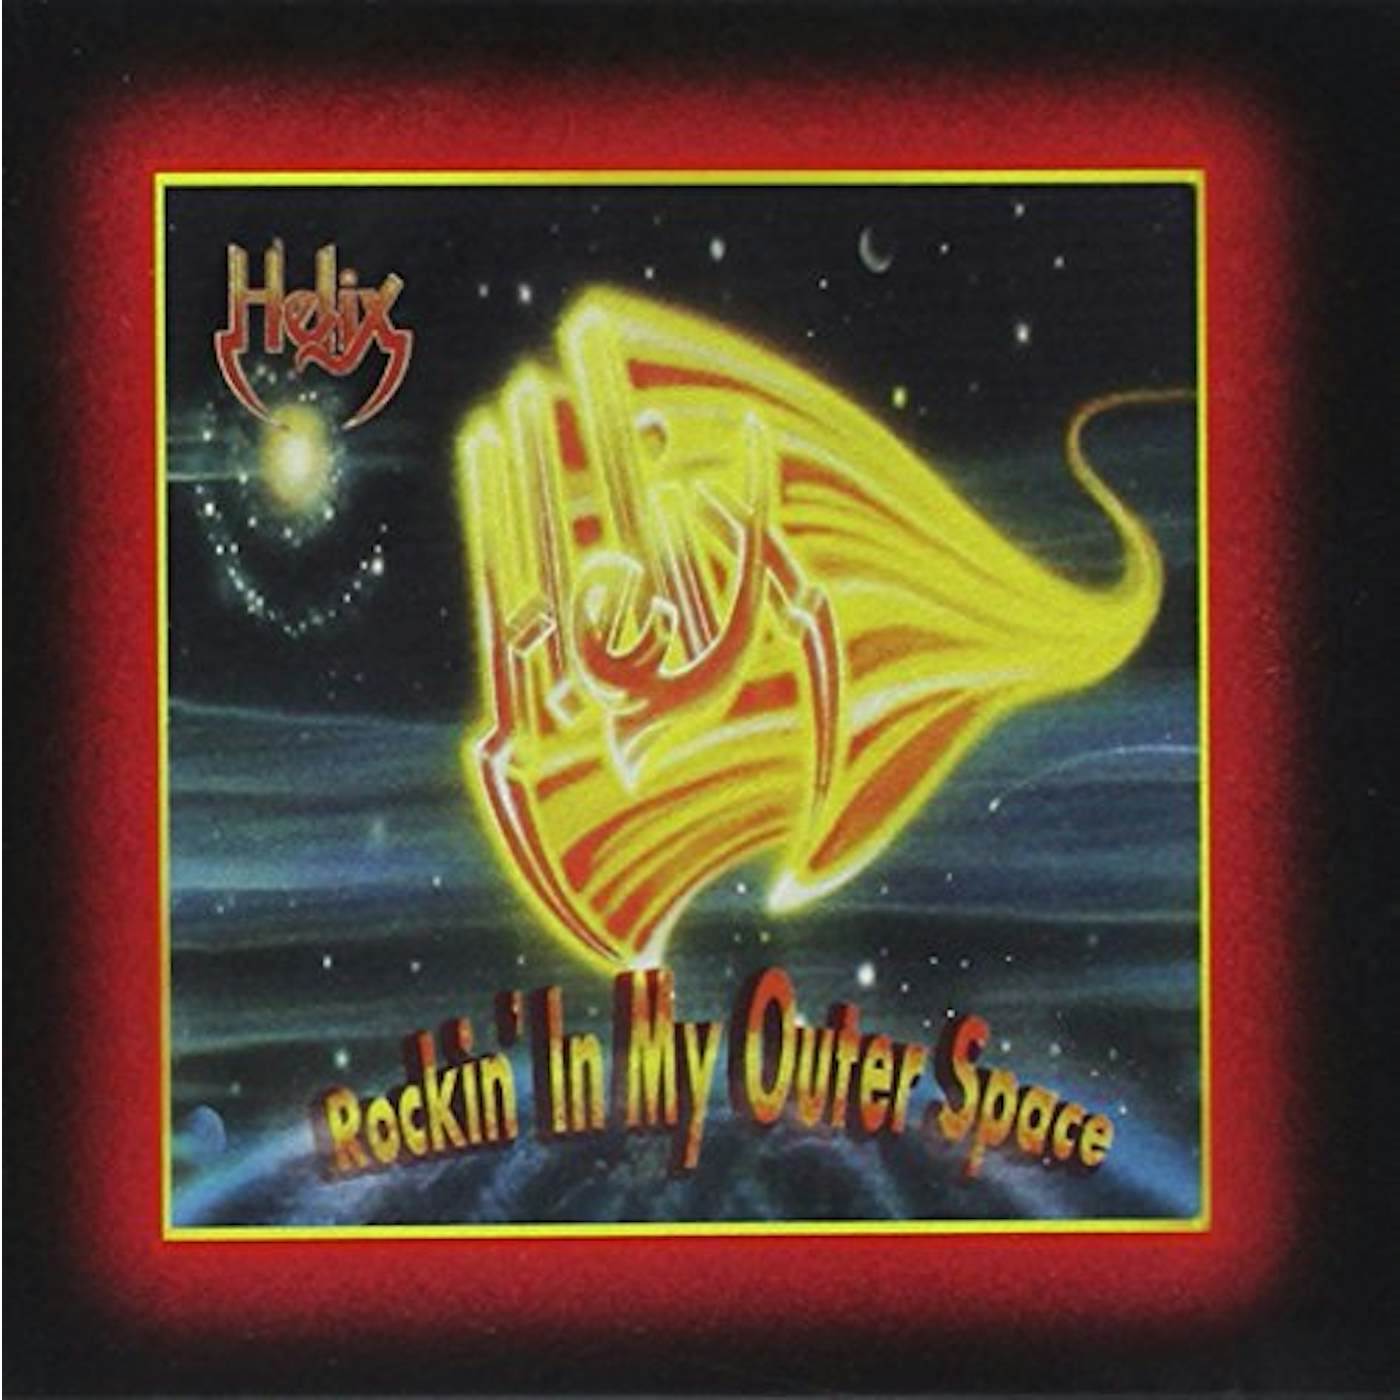 Helix ROCKIN' IN MY OUTER SPACE CD